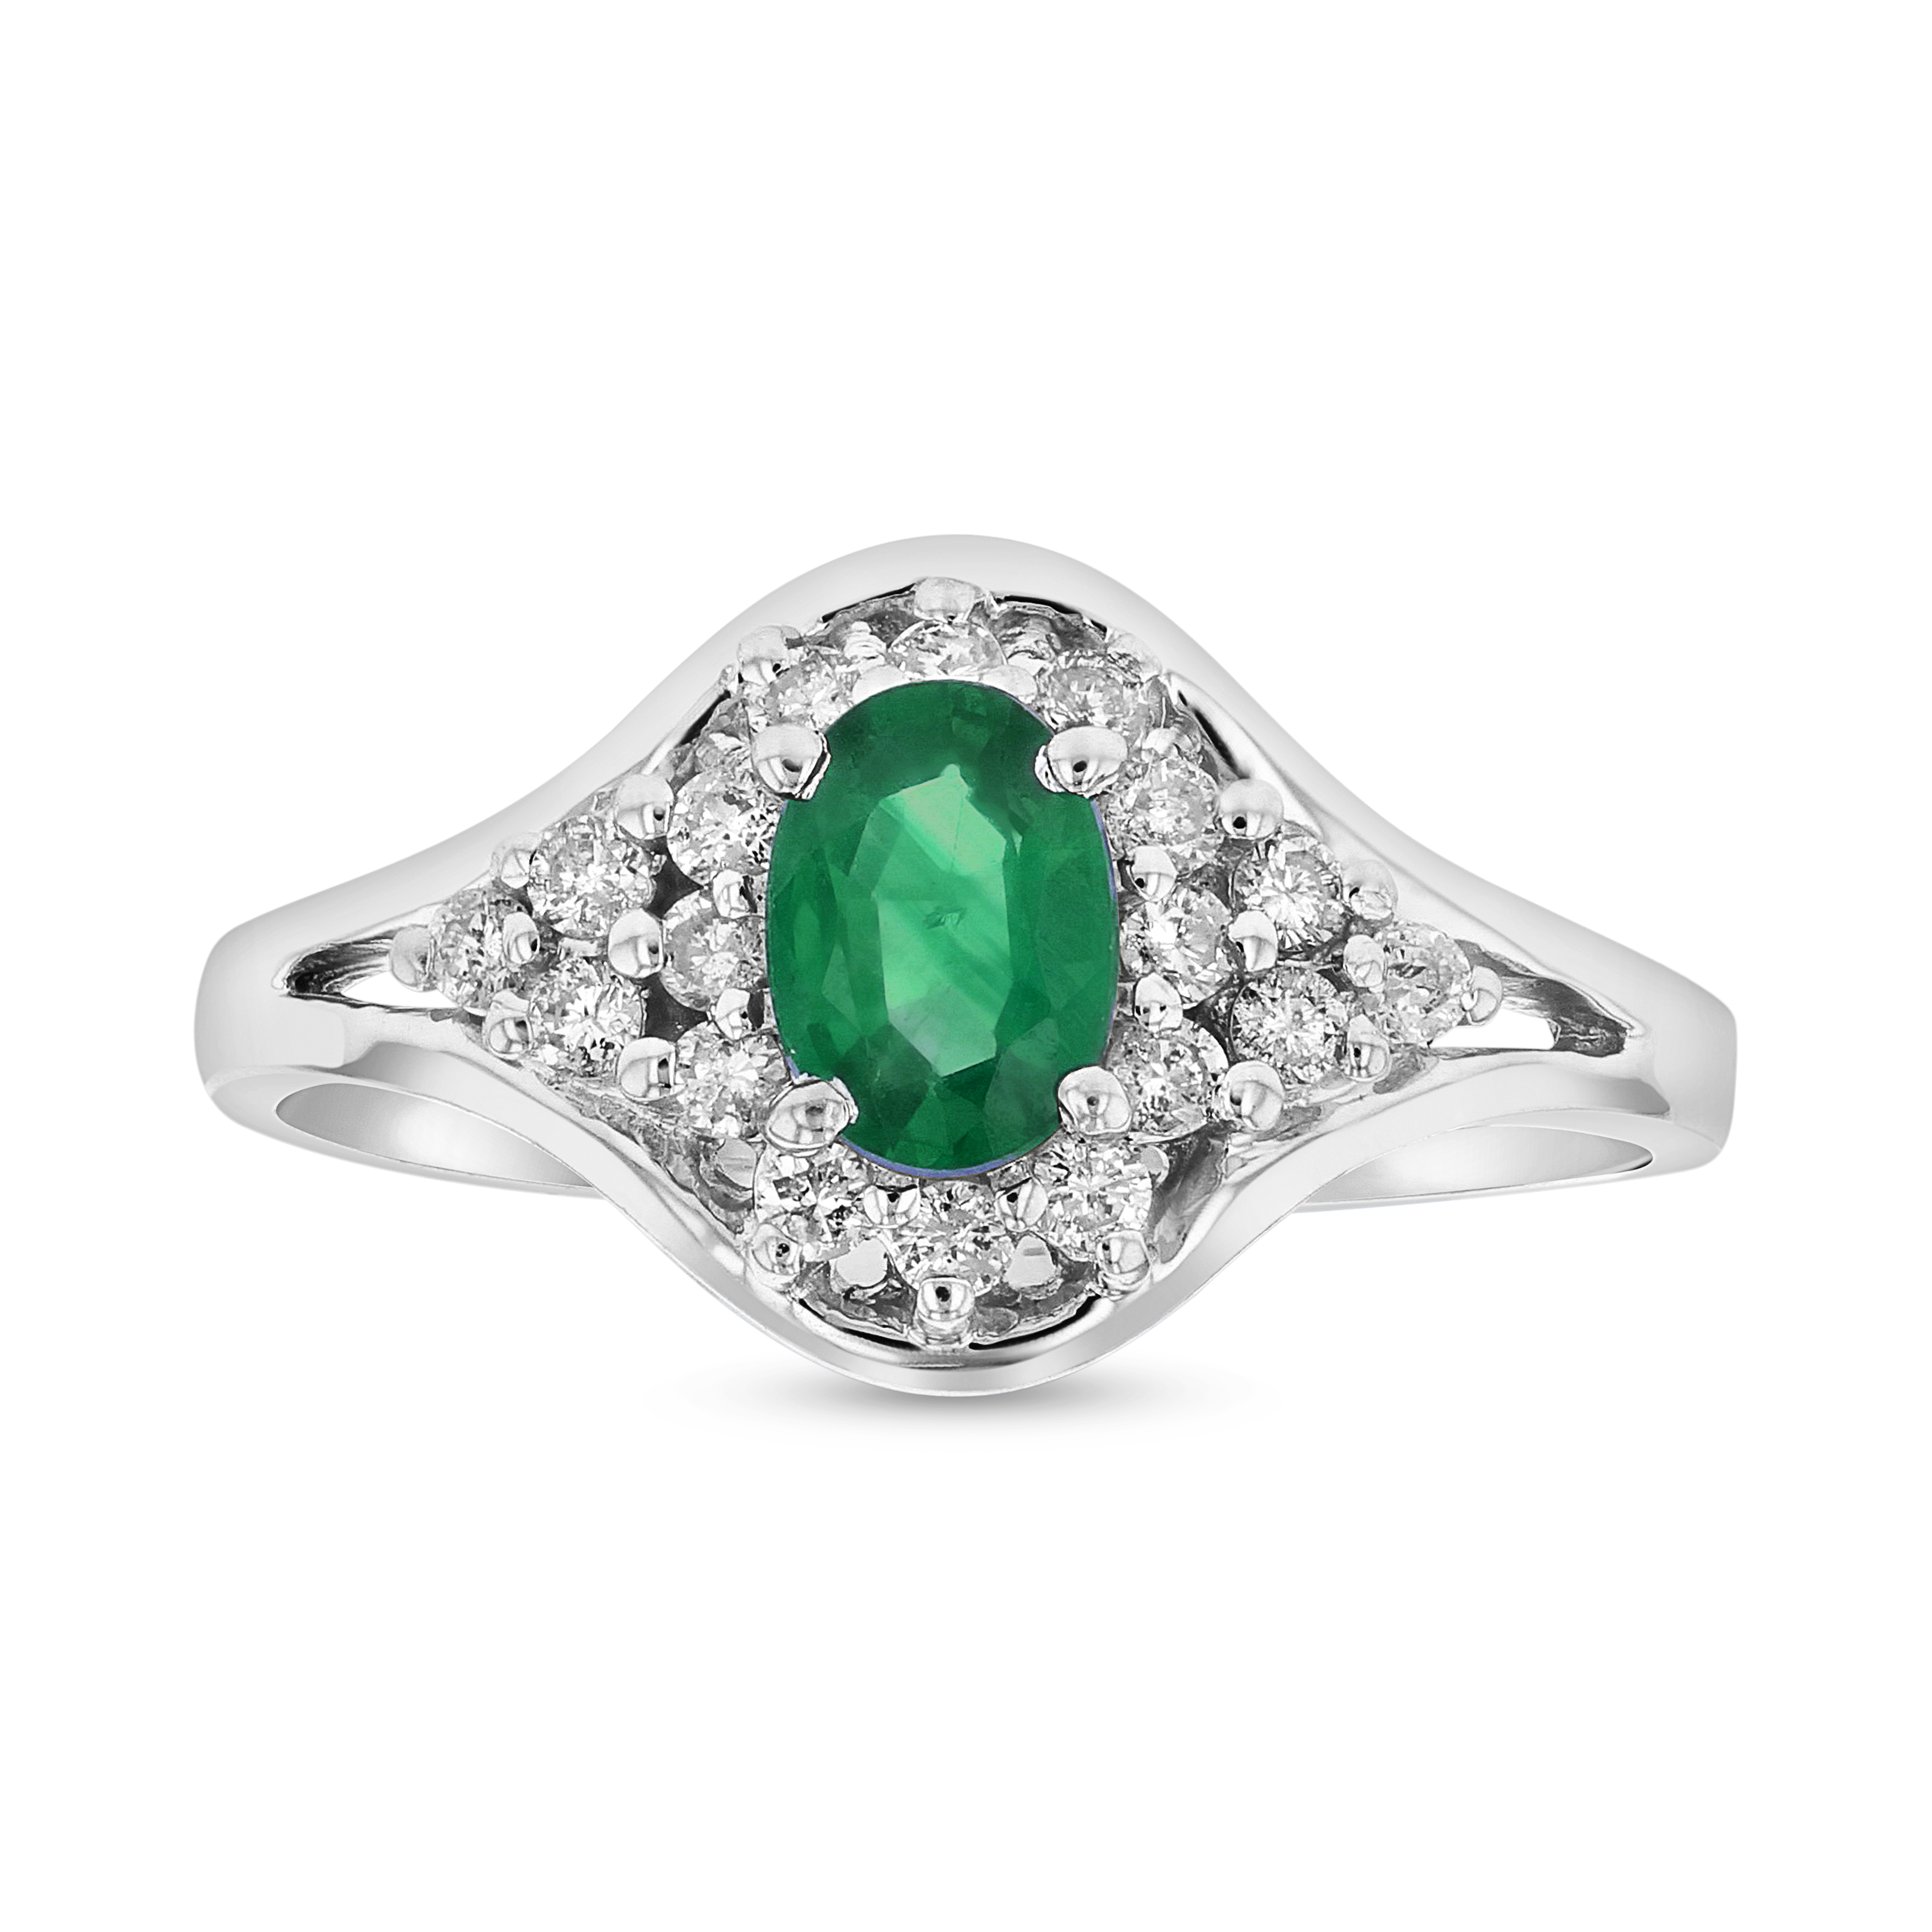 View 0.65ctw Diamond and Emerald RIng in 14k White Gold